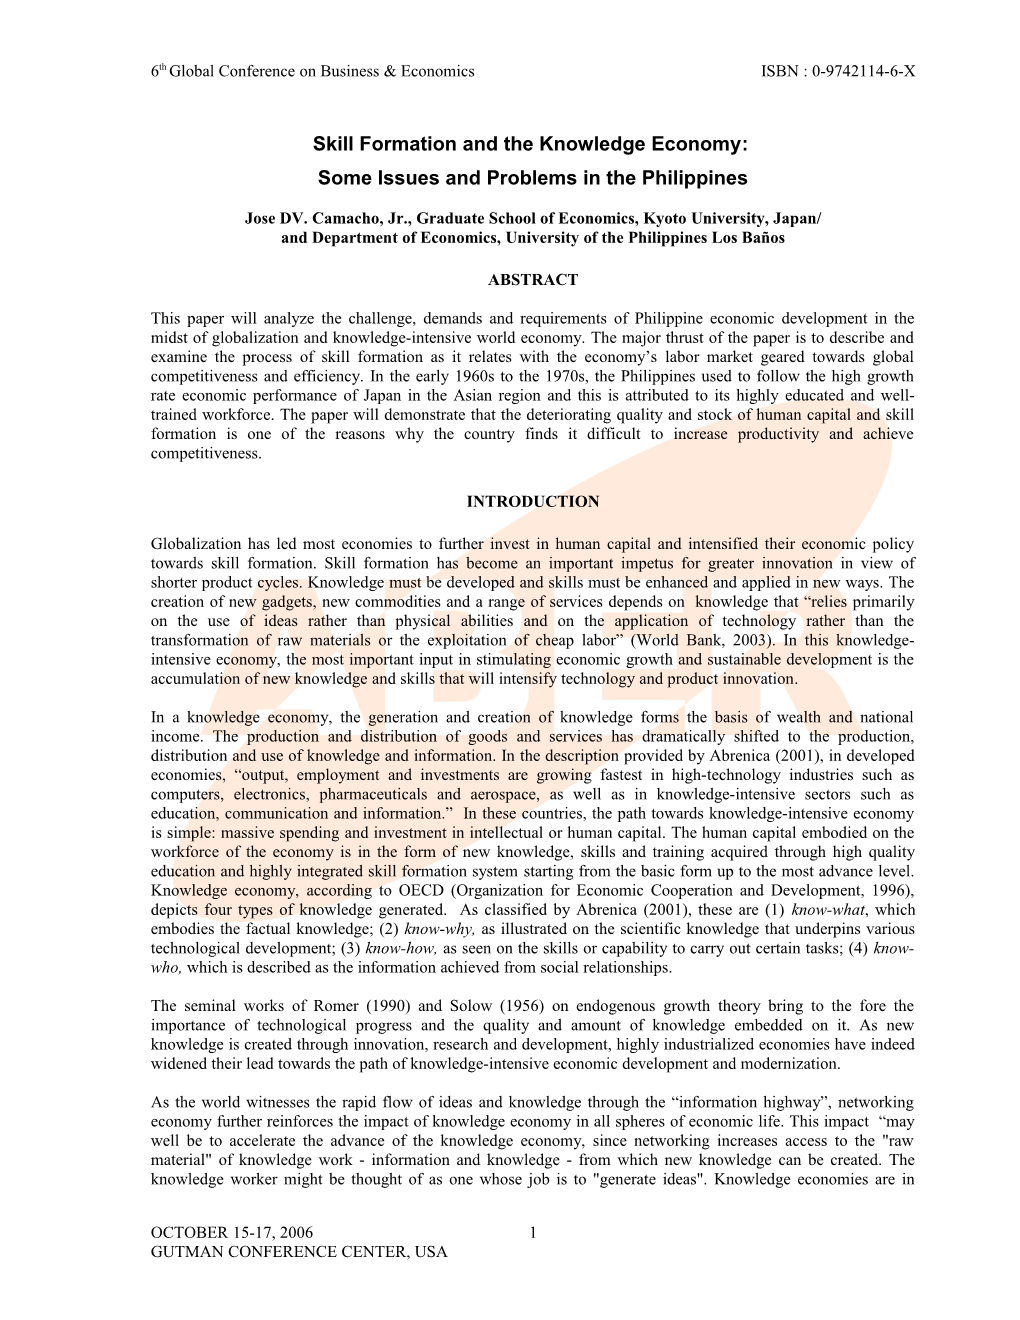 Skill Formation And The Knowledge Economy: Some Issues And Problems In The Philippines